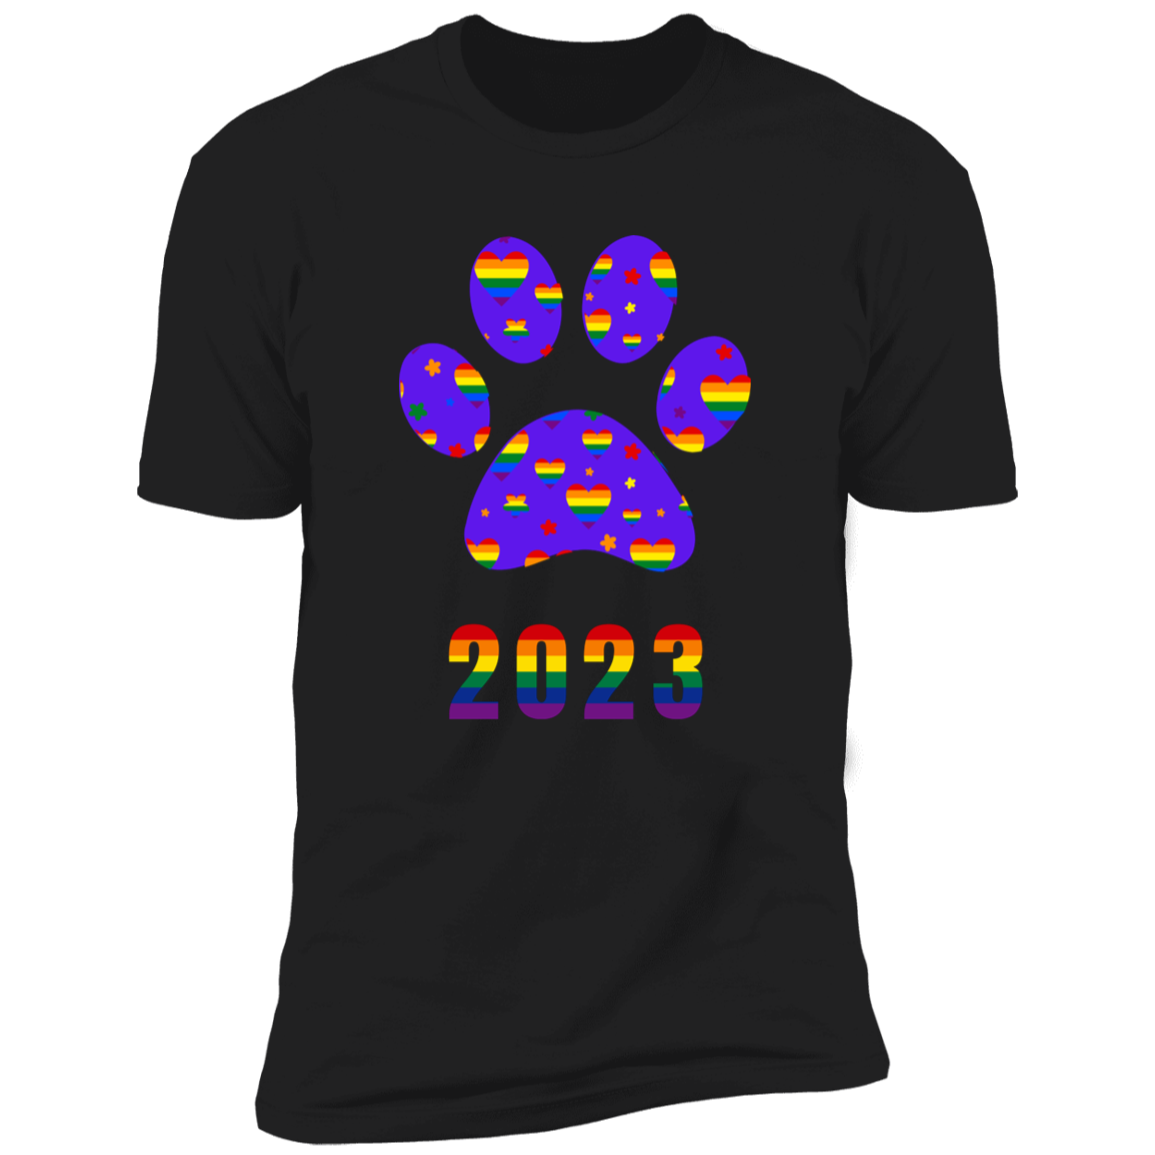 Pride Paw 2023 (Hearts) Pride T-shirt, Paw Pride Dog Shirt for humans, in black